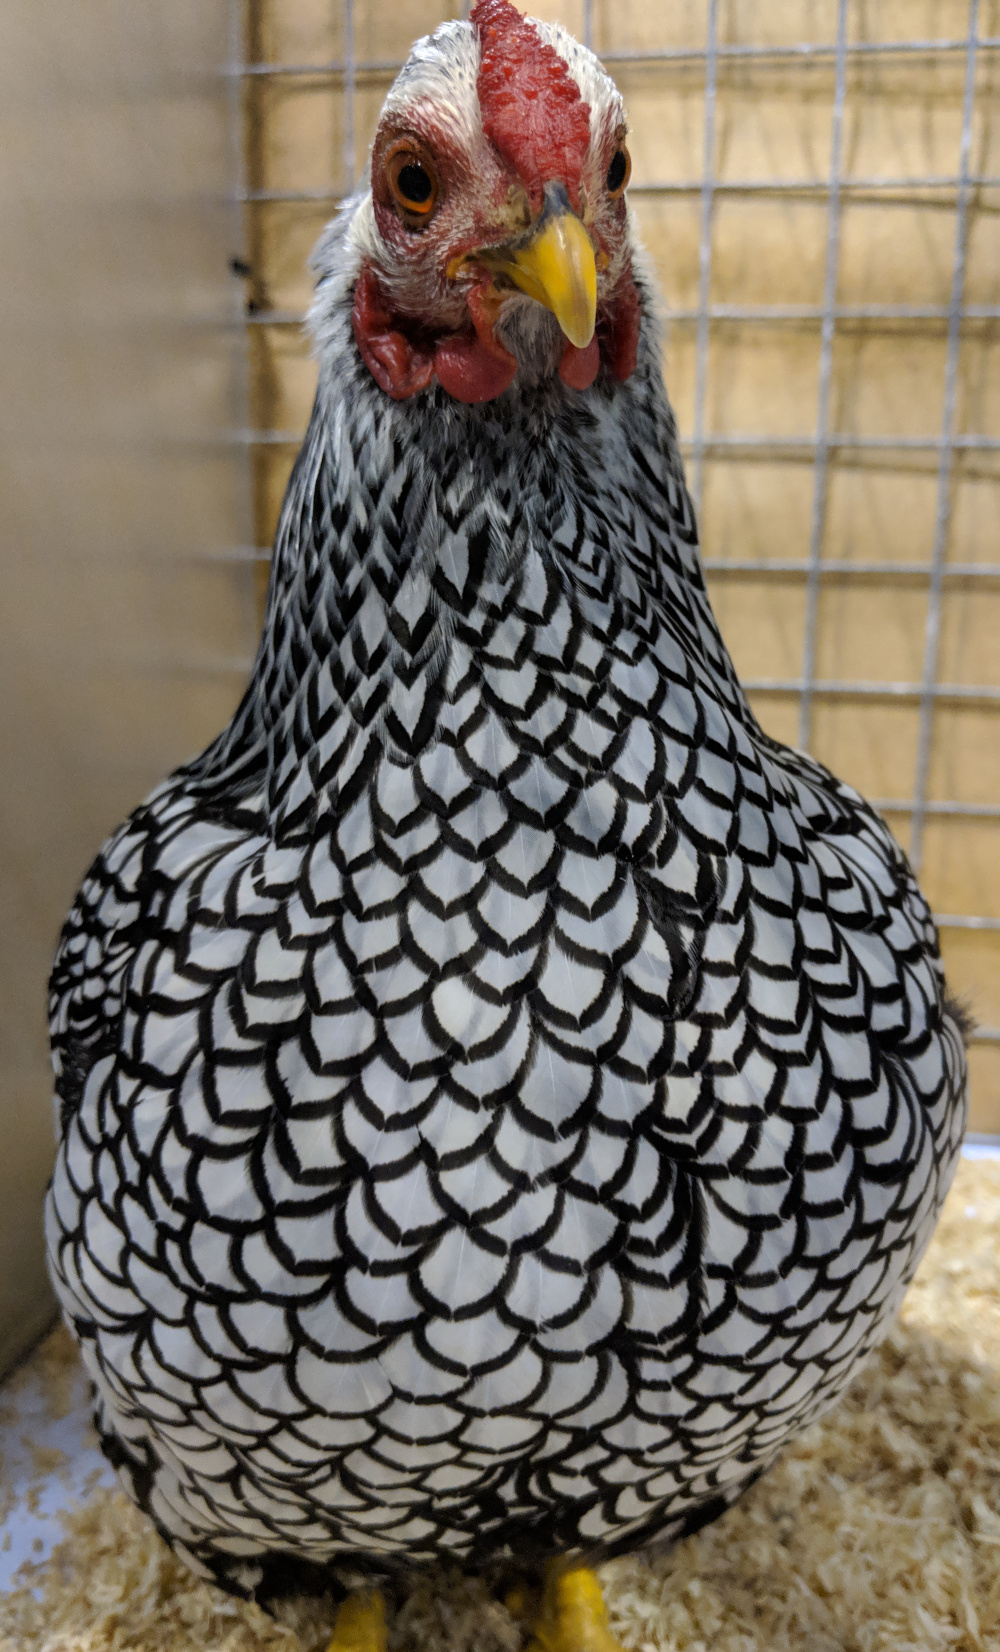 A silver laced wyandotte hen showing off her feather patterns